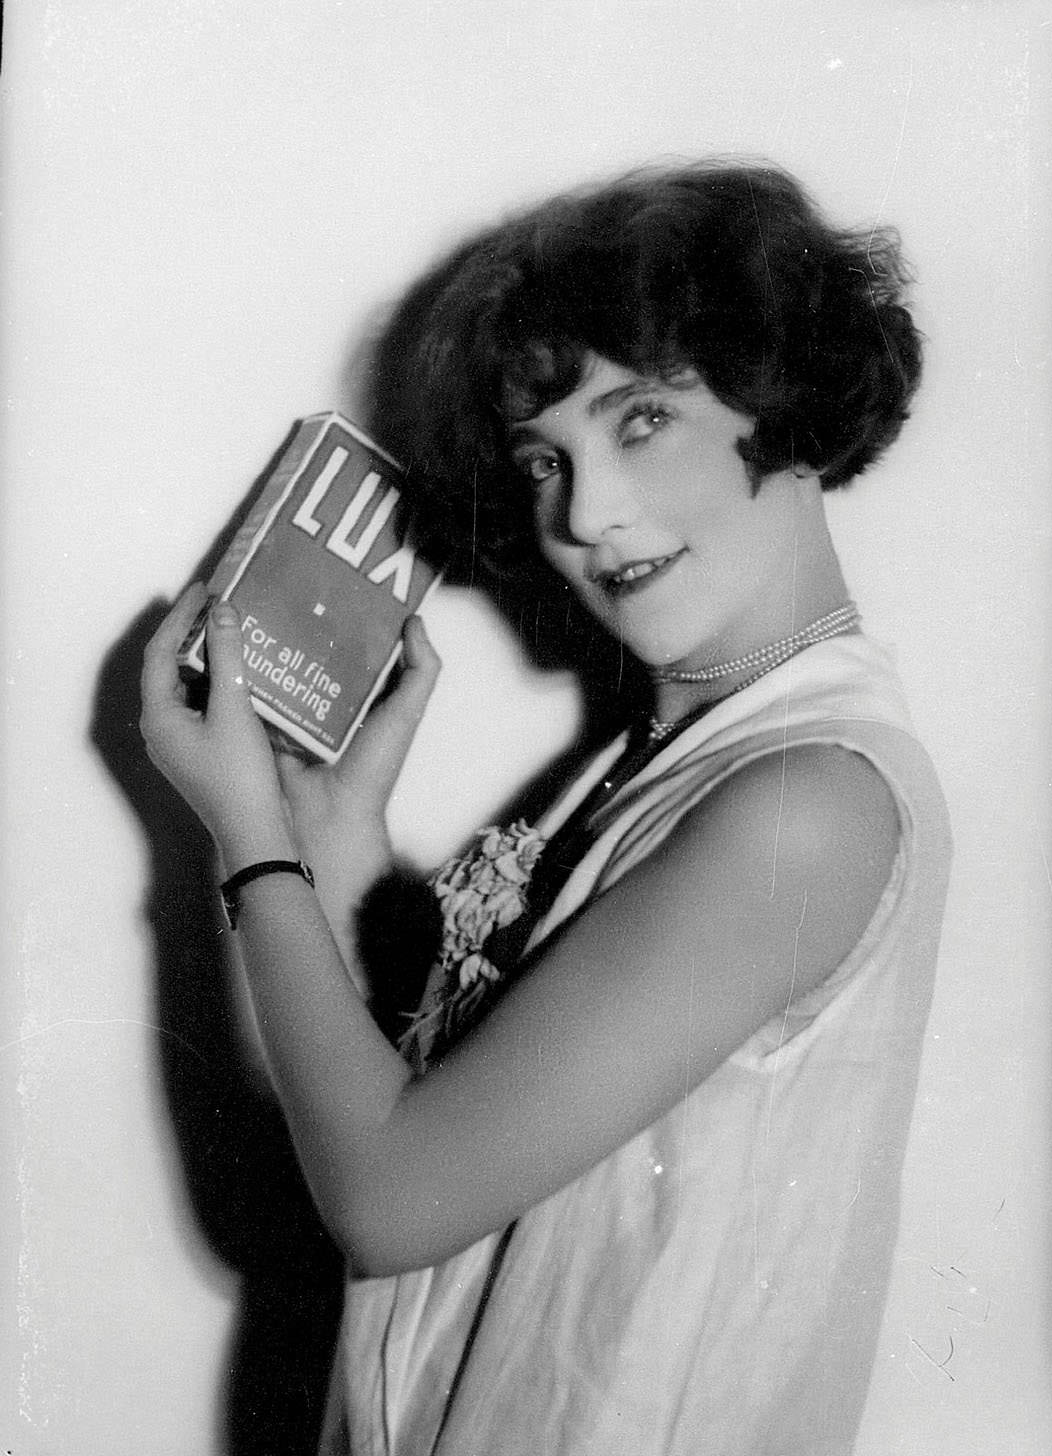 Portrait of a woman holding a box of Lux laundry powder